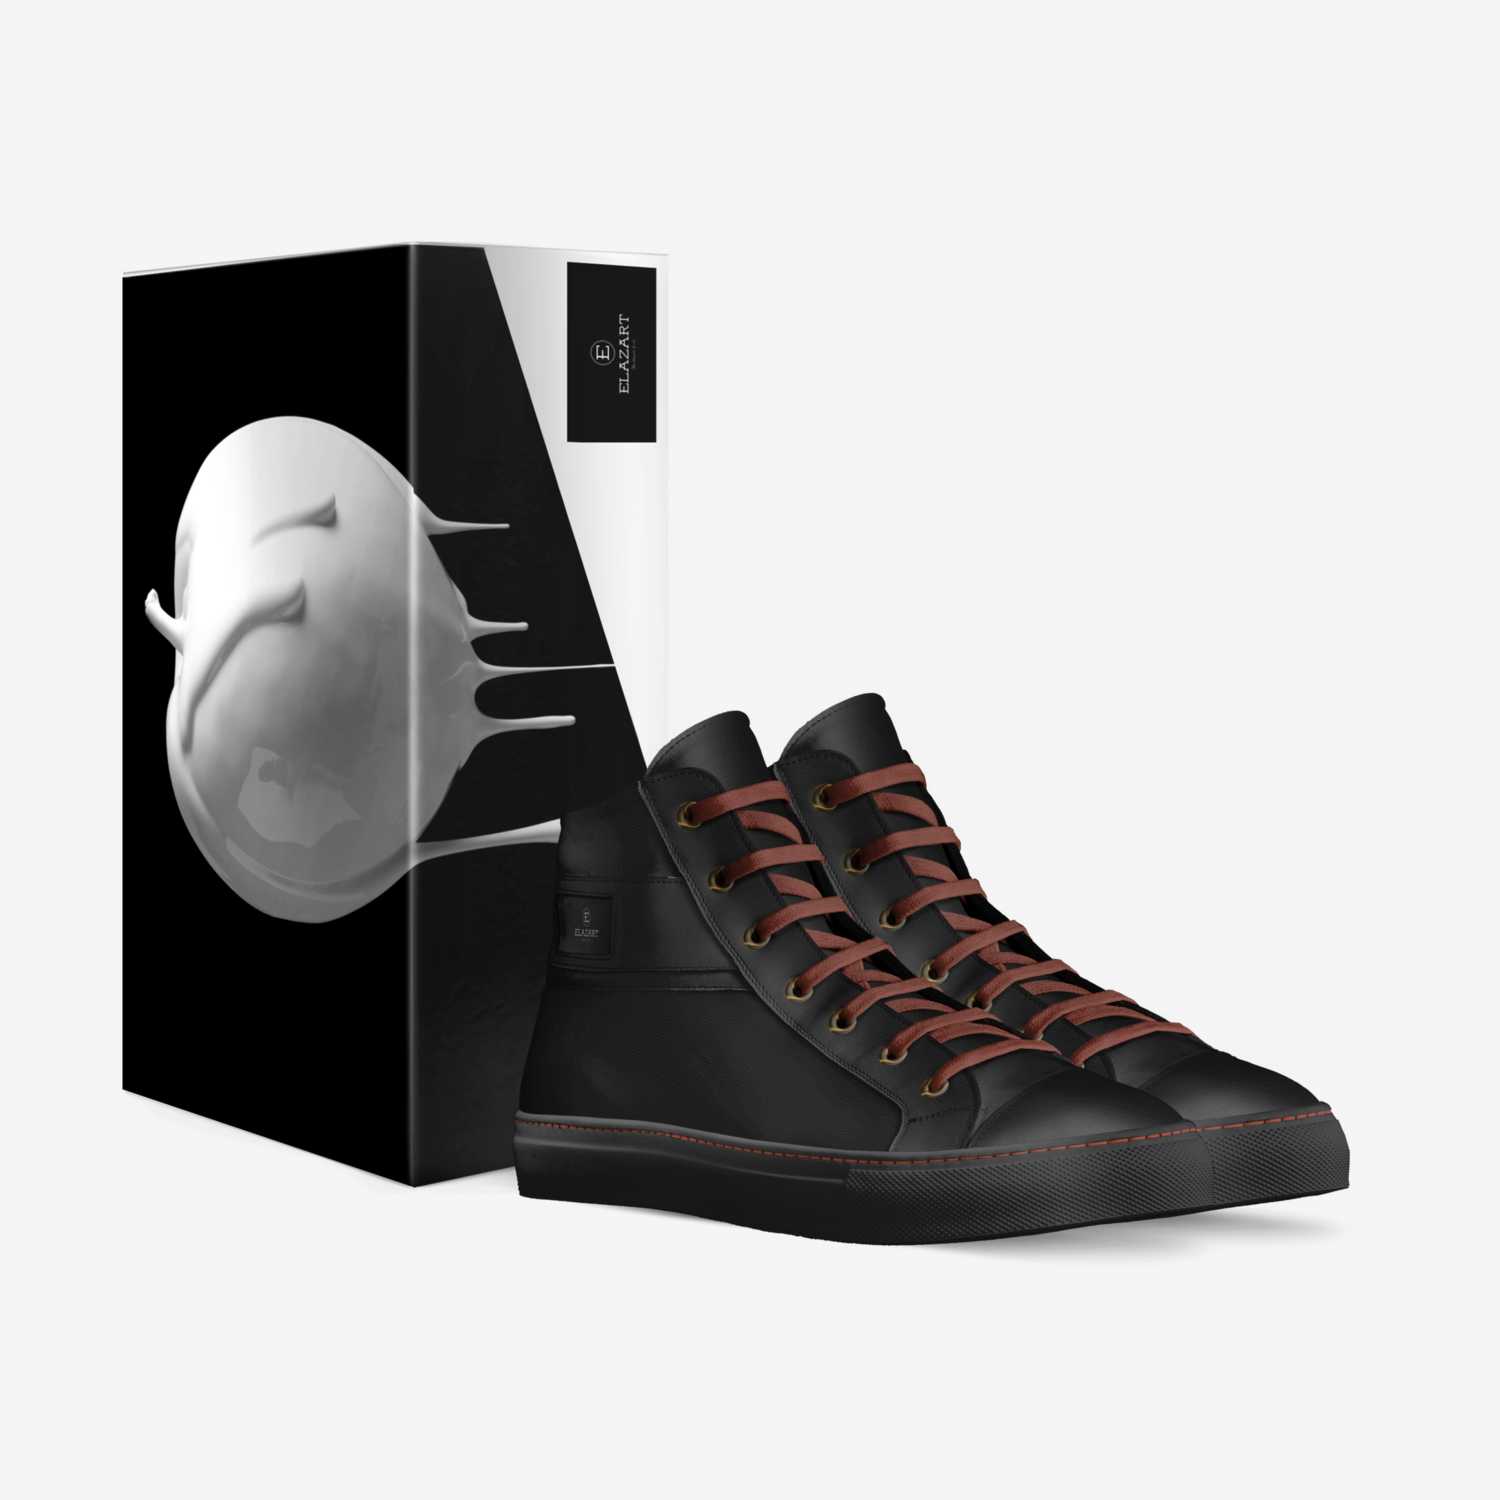 Elazart custom made in Italy shoes by Linus Rosén | Box view